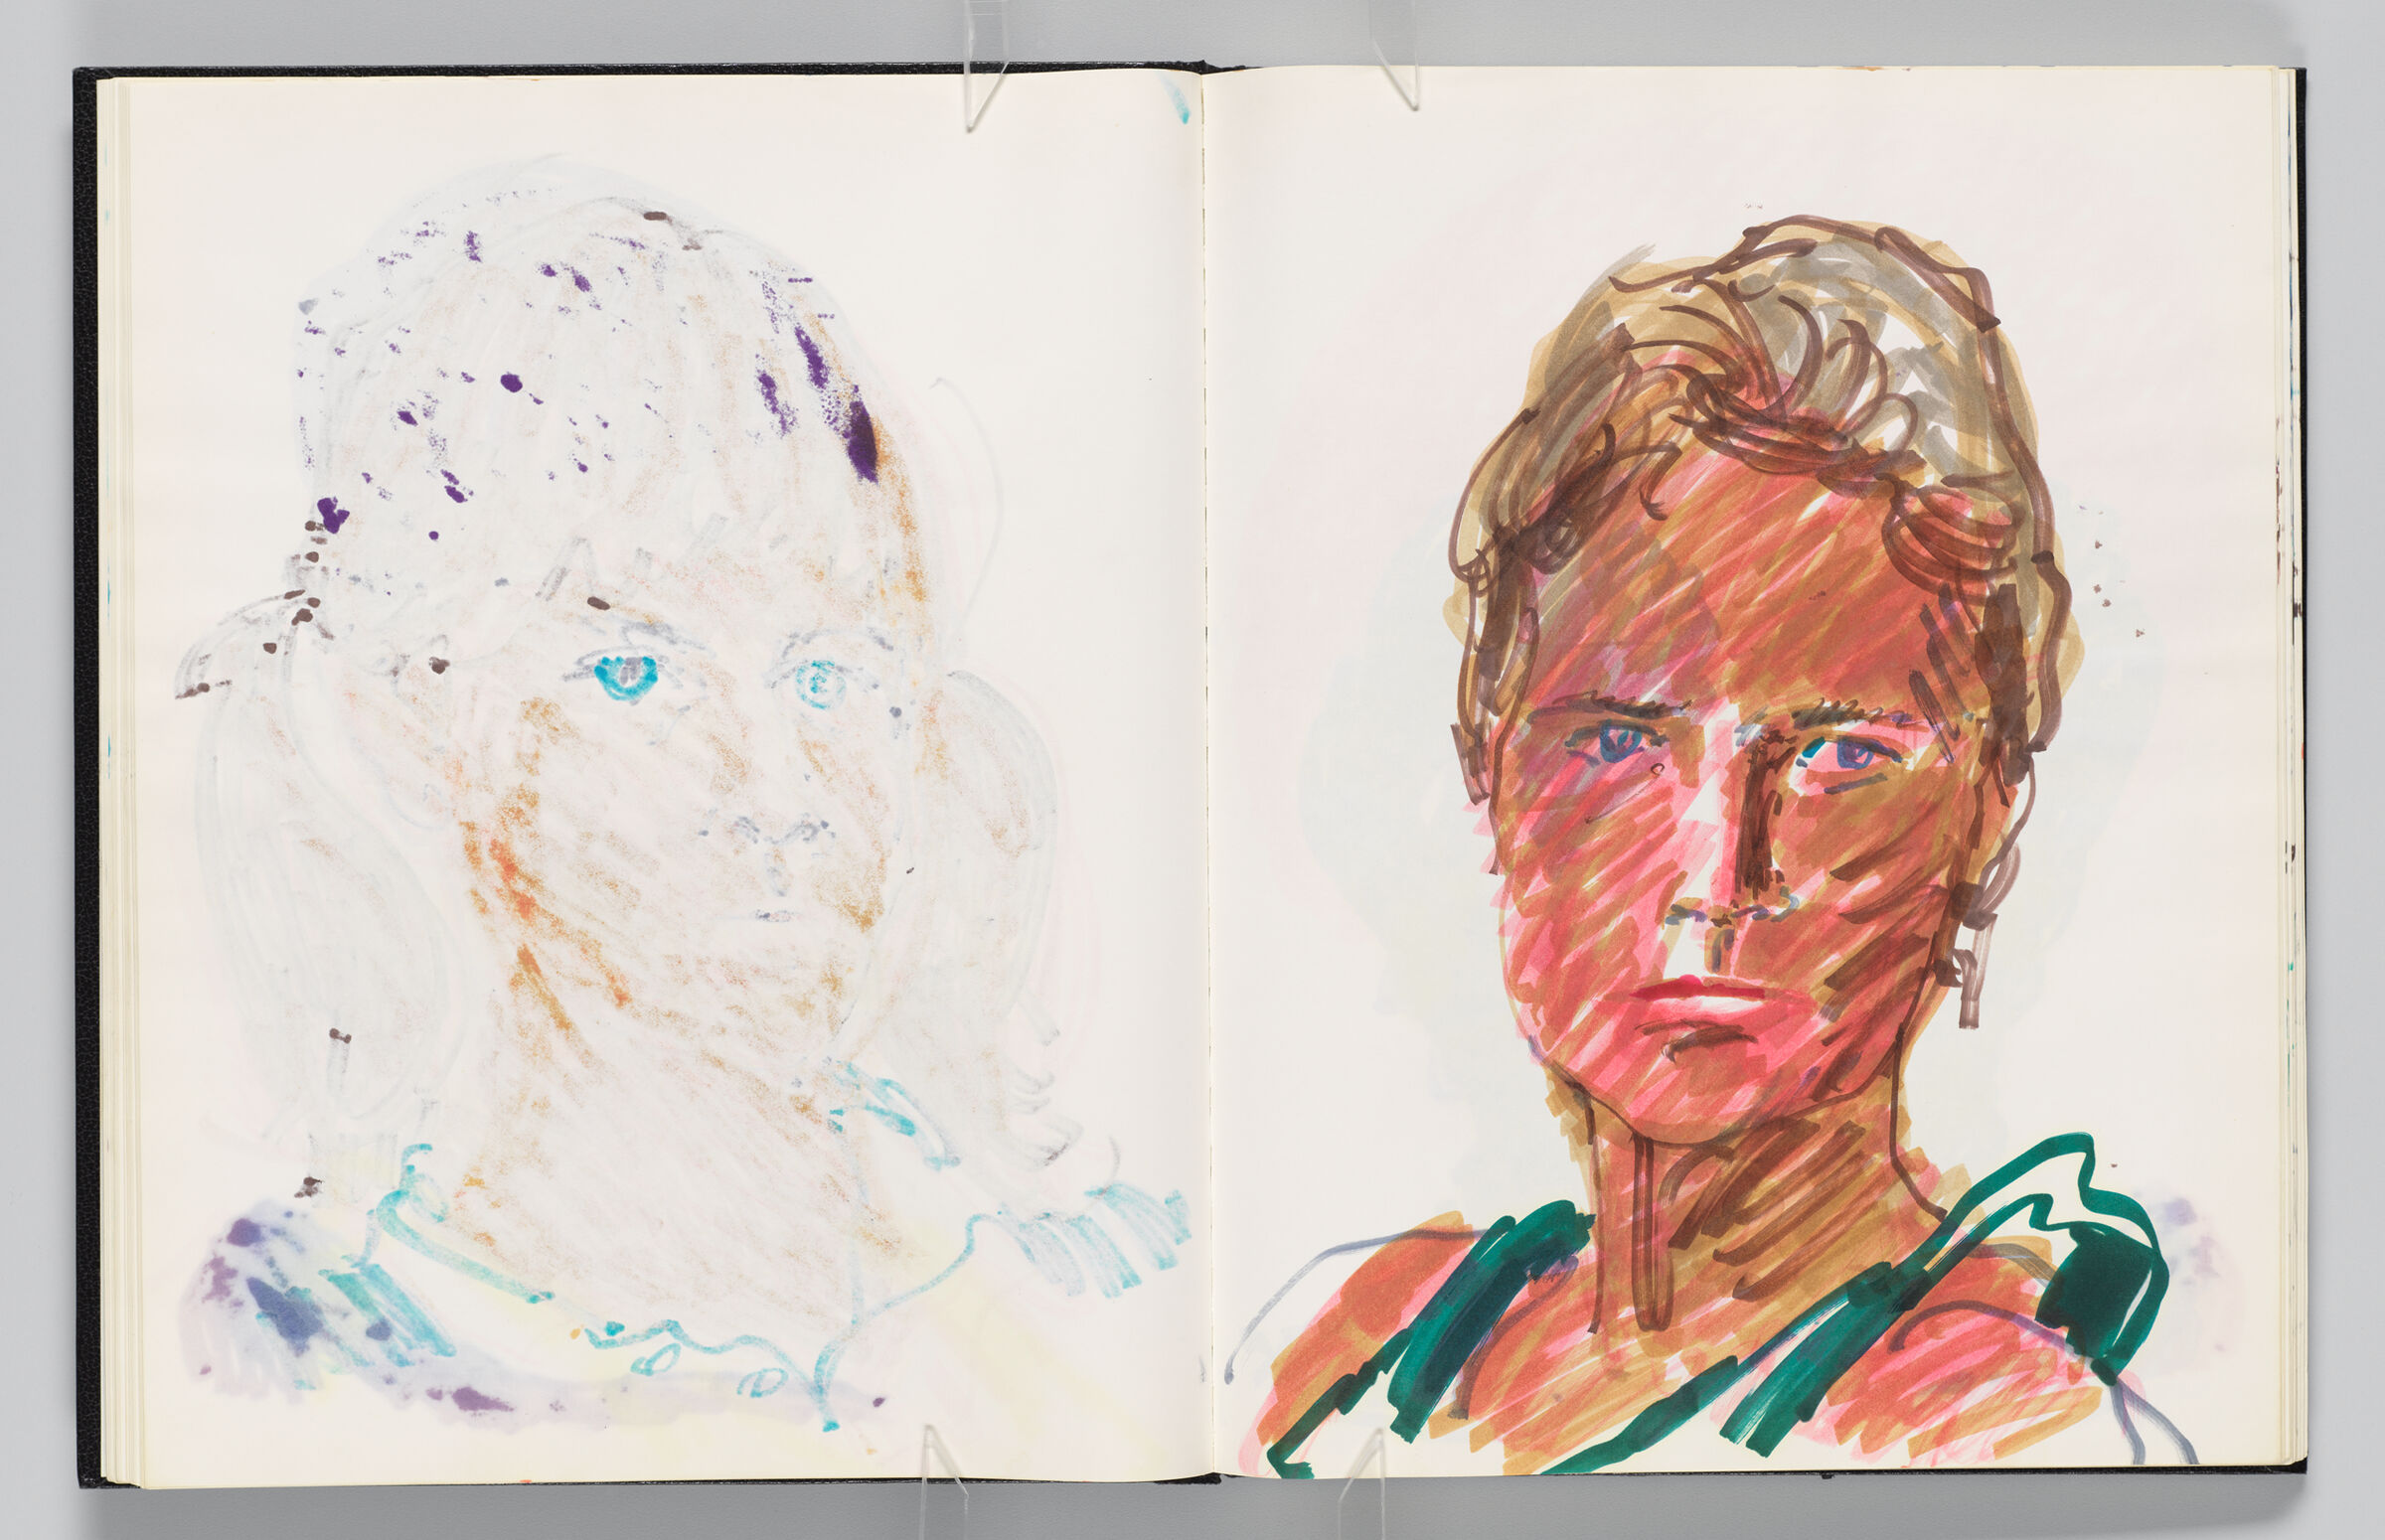 Untitled (Bleed-Through Of Previous Page, Left Page); Untitled (Portrait Of Female Figure (Elizabeth?), Right Page)